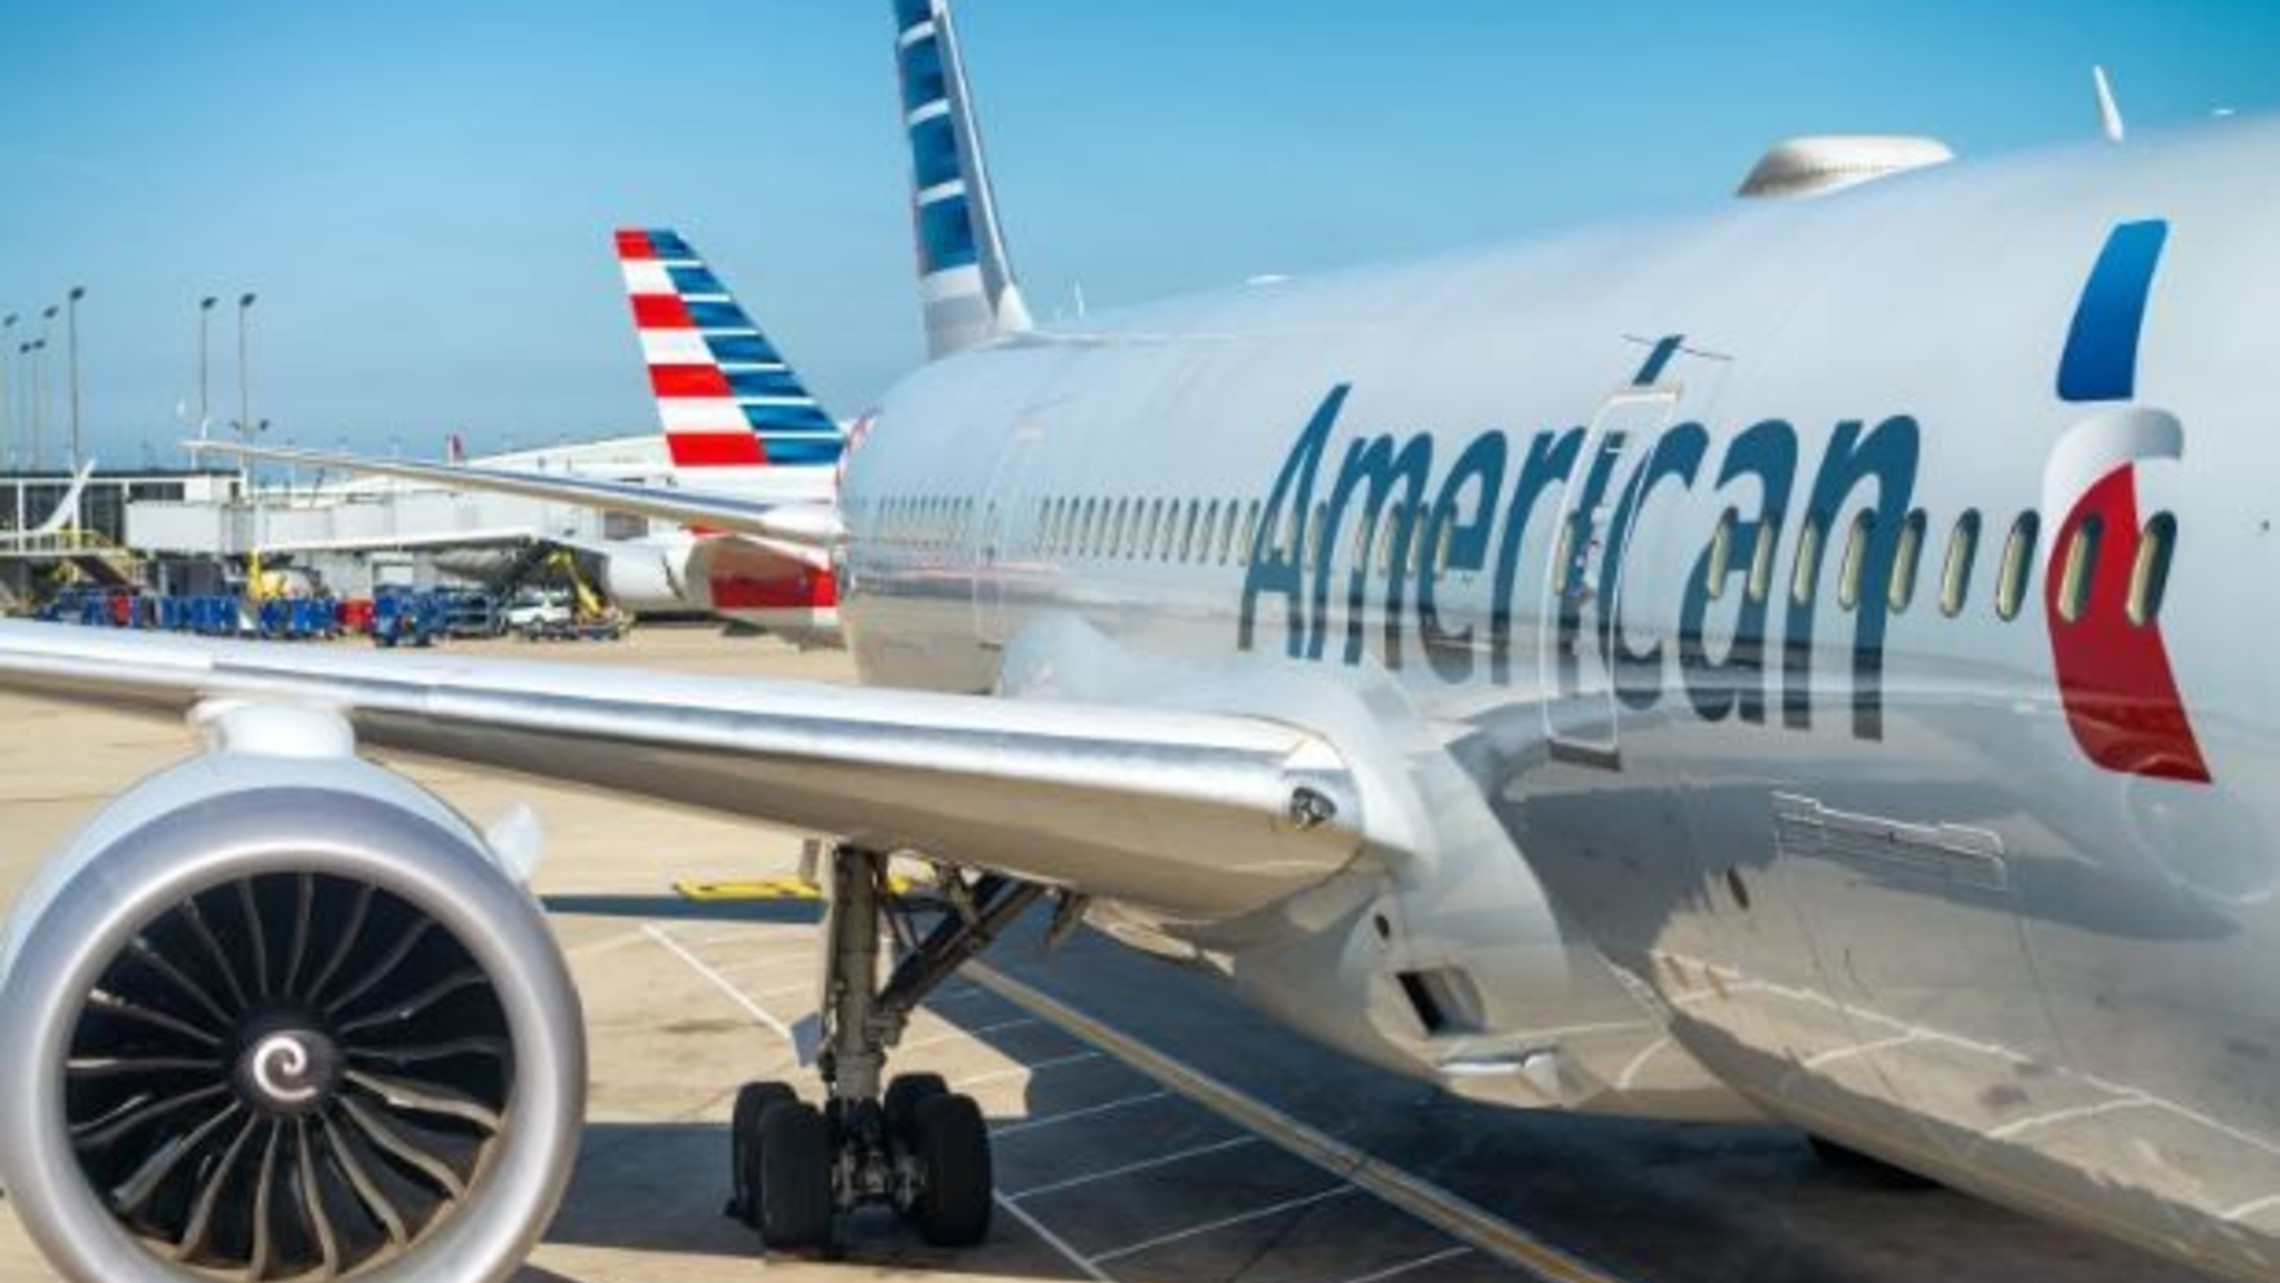 American Airlines jet on the ground